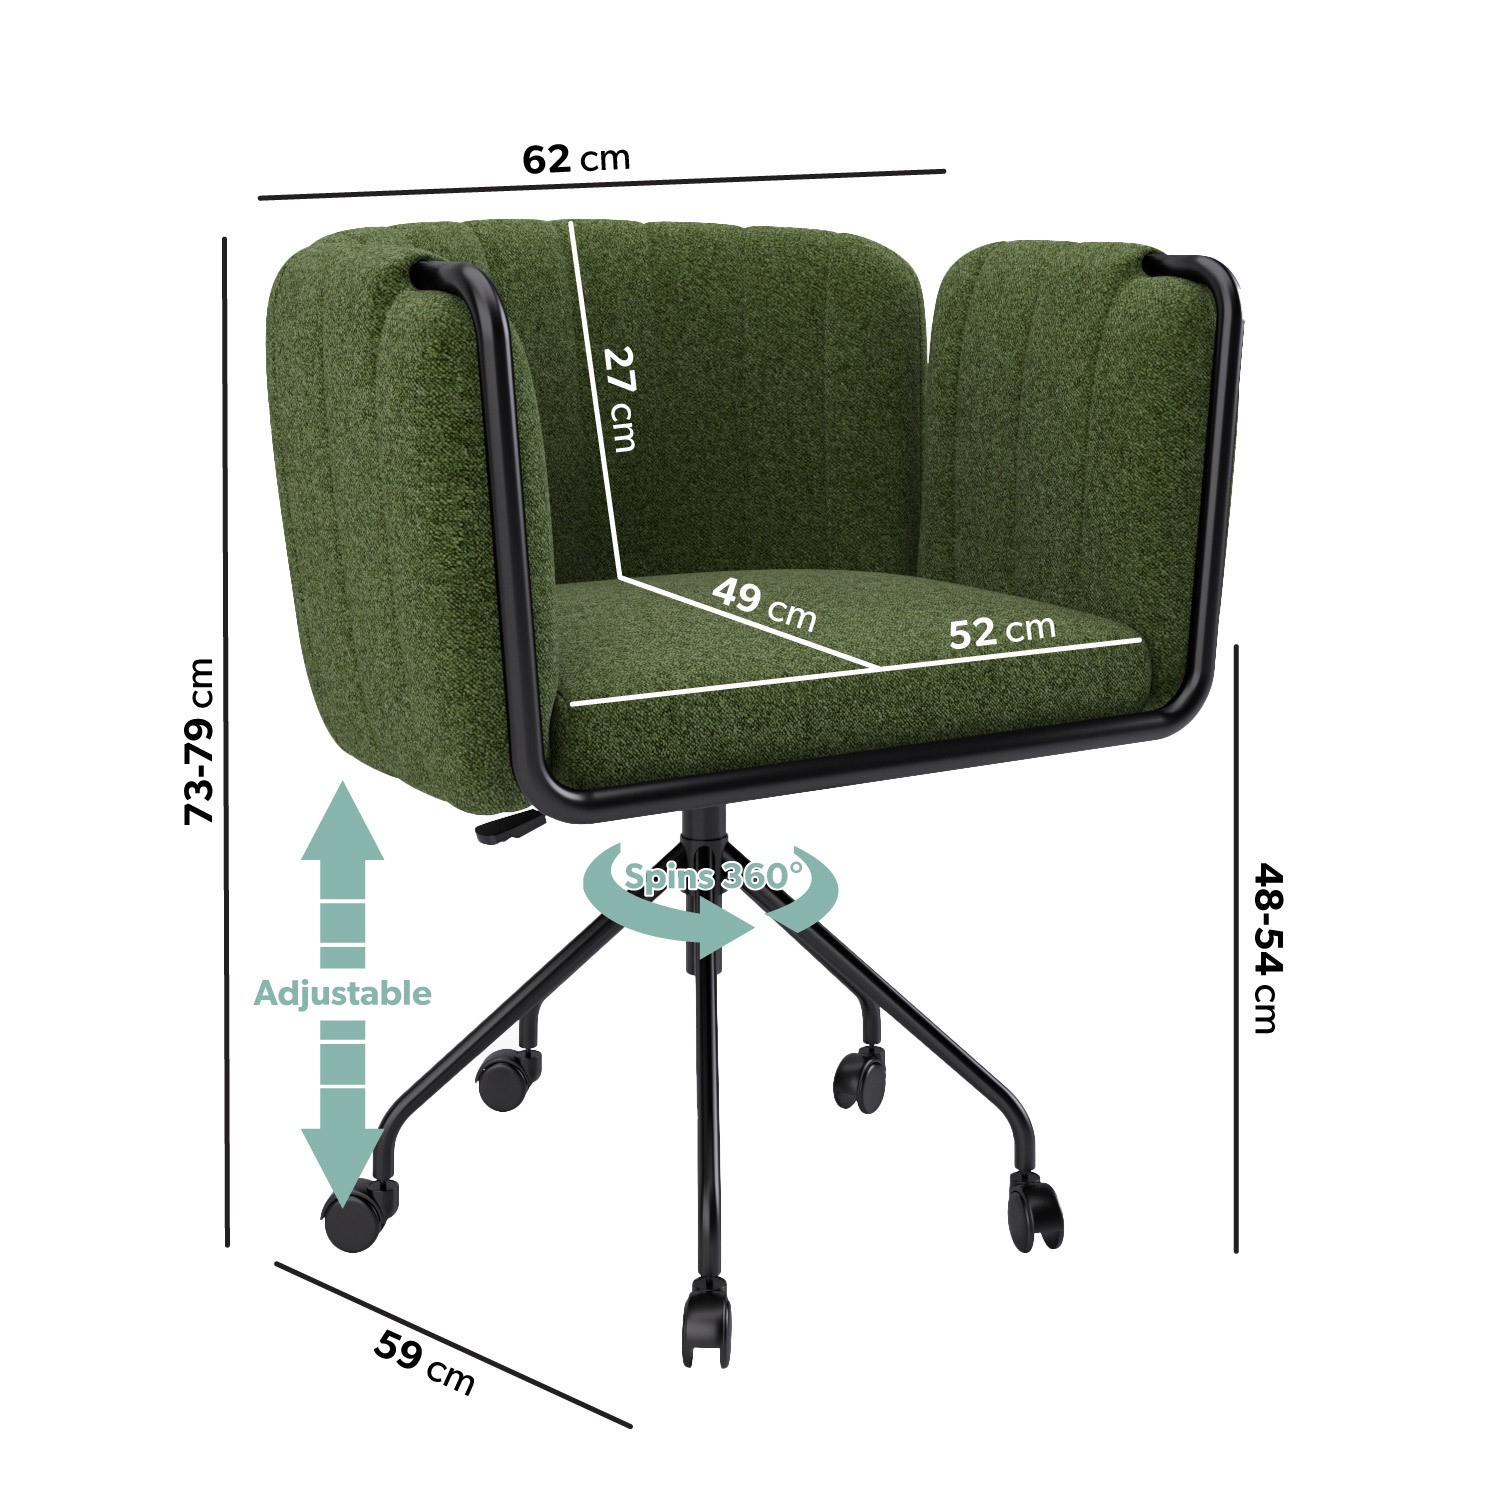 Read more about Olive green fabric swivel office chair orlaa